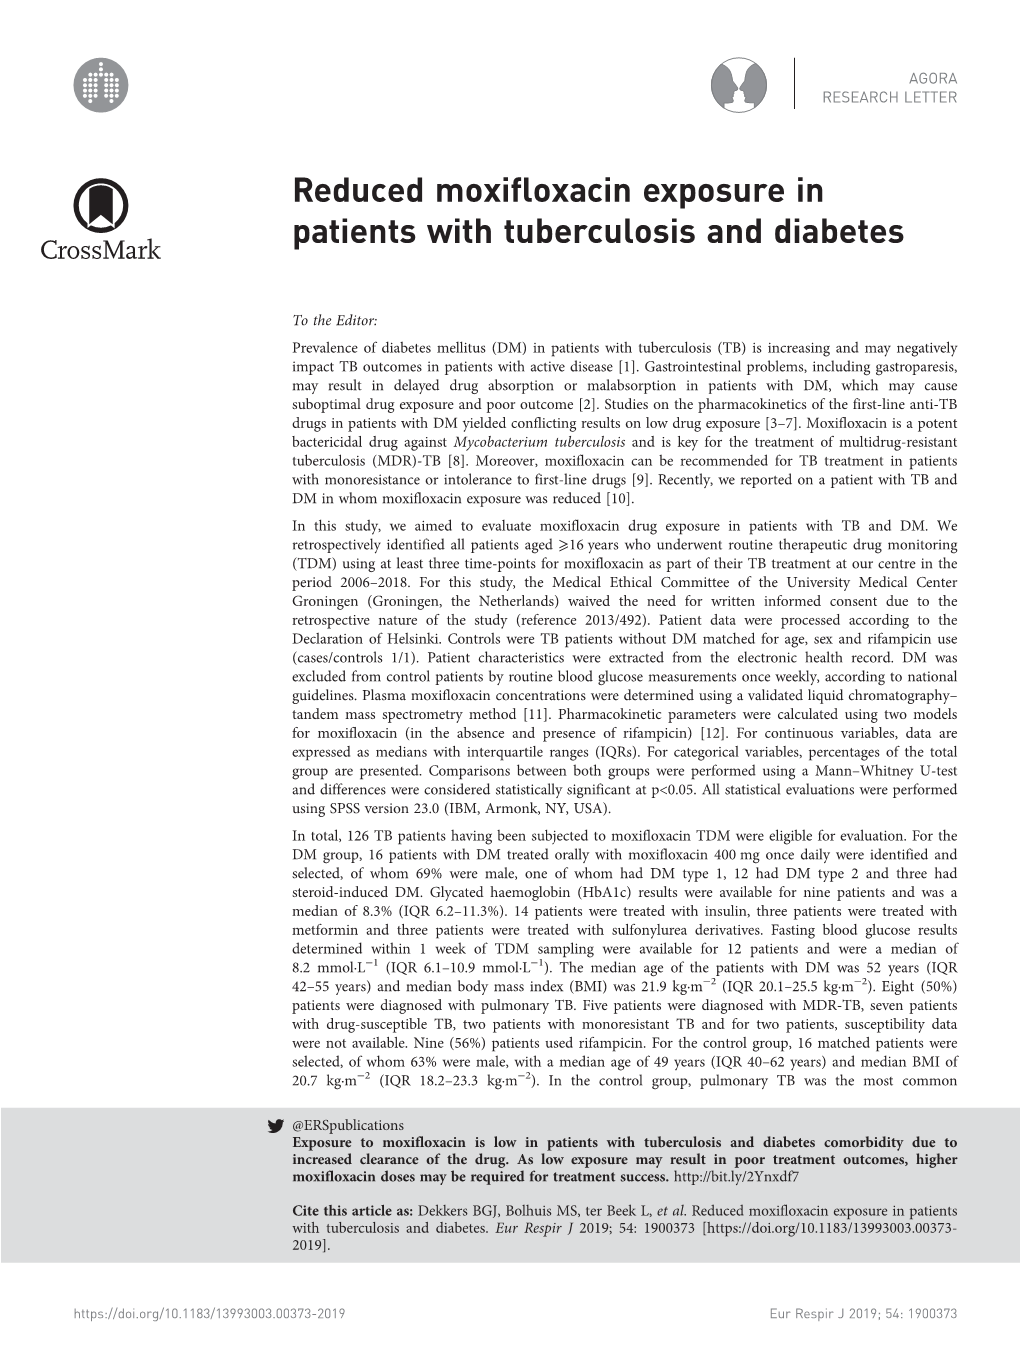 Reduced Moxifloxacin Exposure in Patients with Tuberculosis and Diabetes